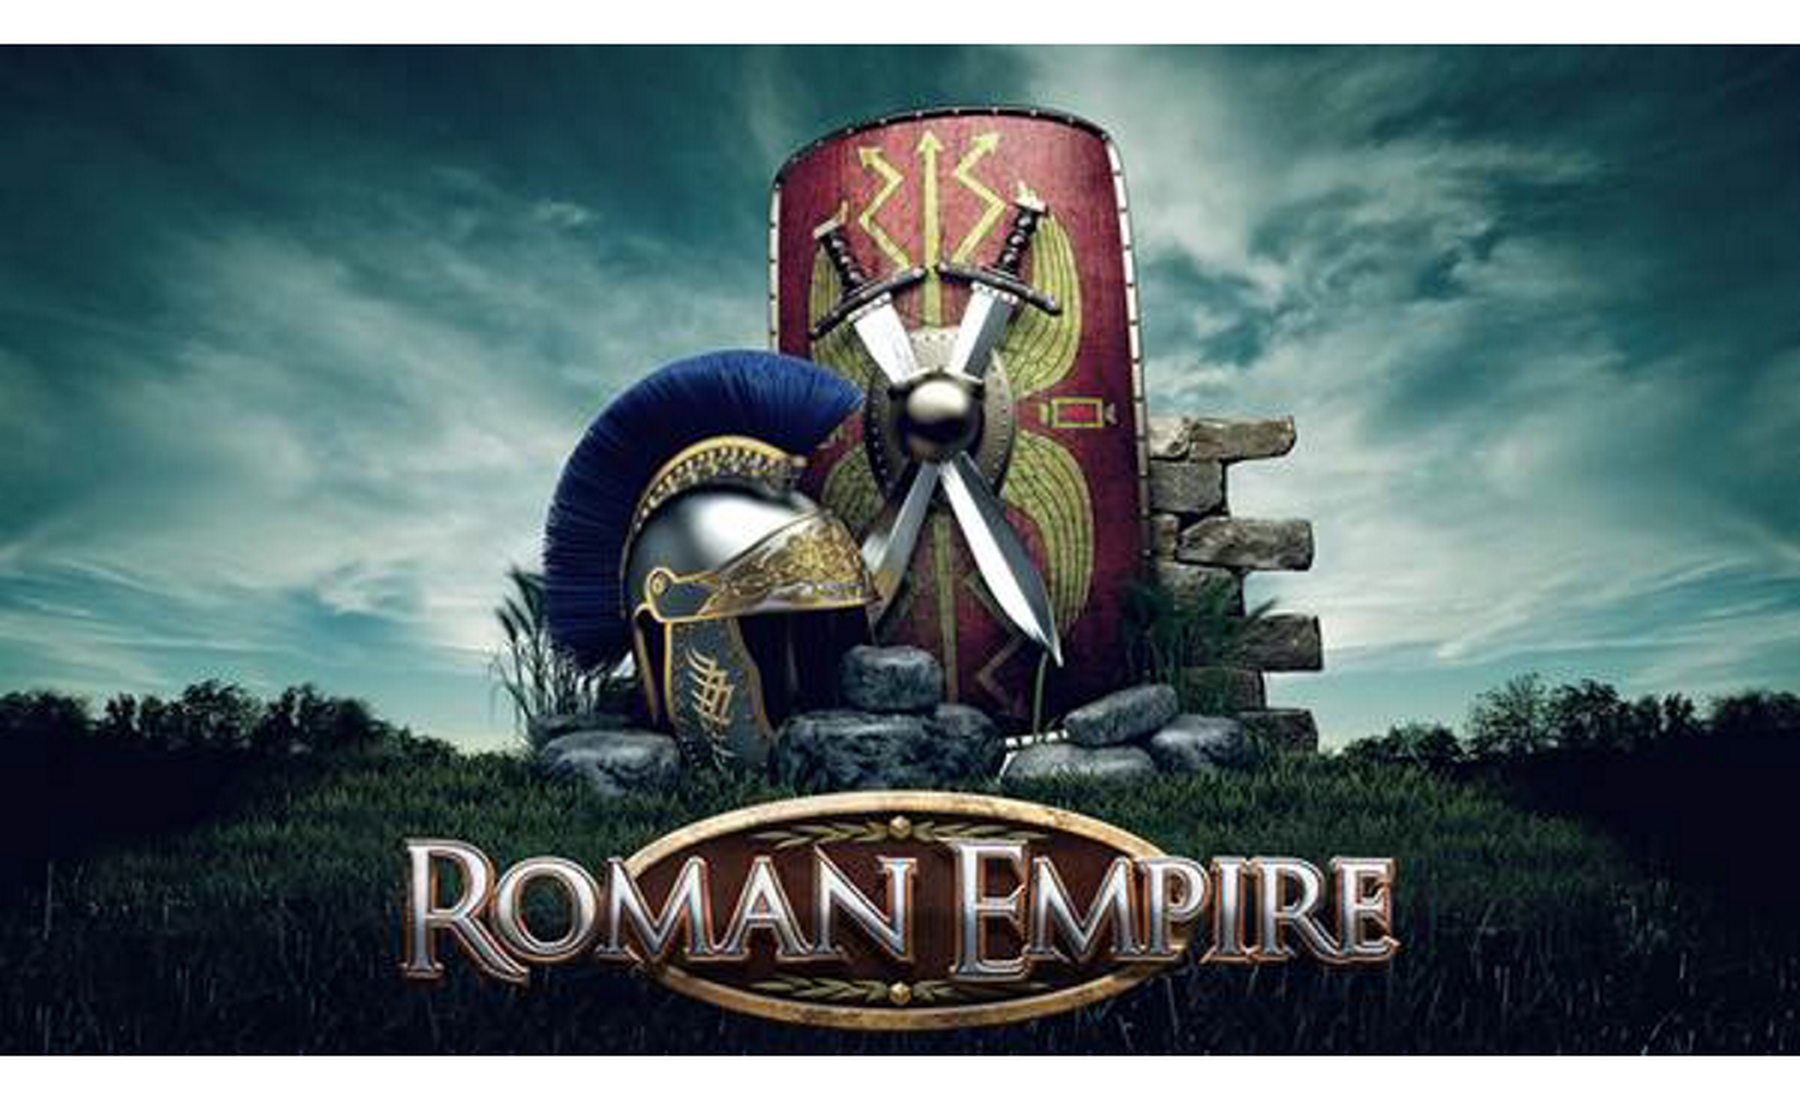 The Roman Empire Online Slot Demo Game by Habanero